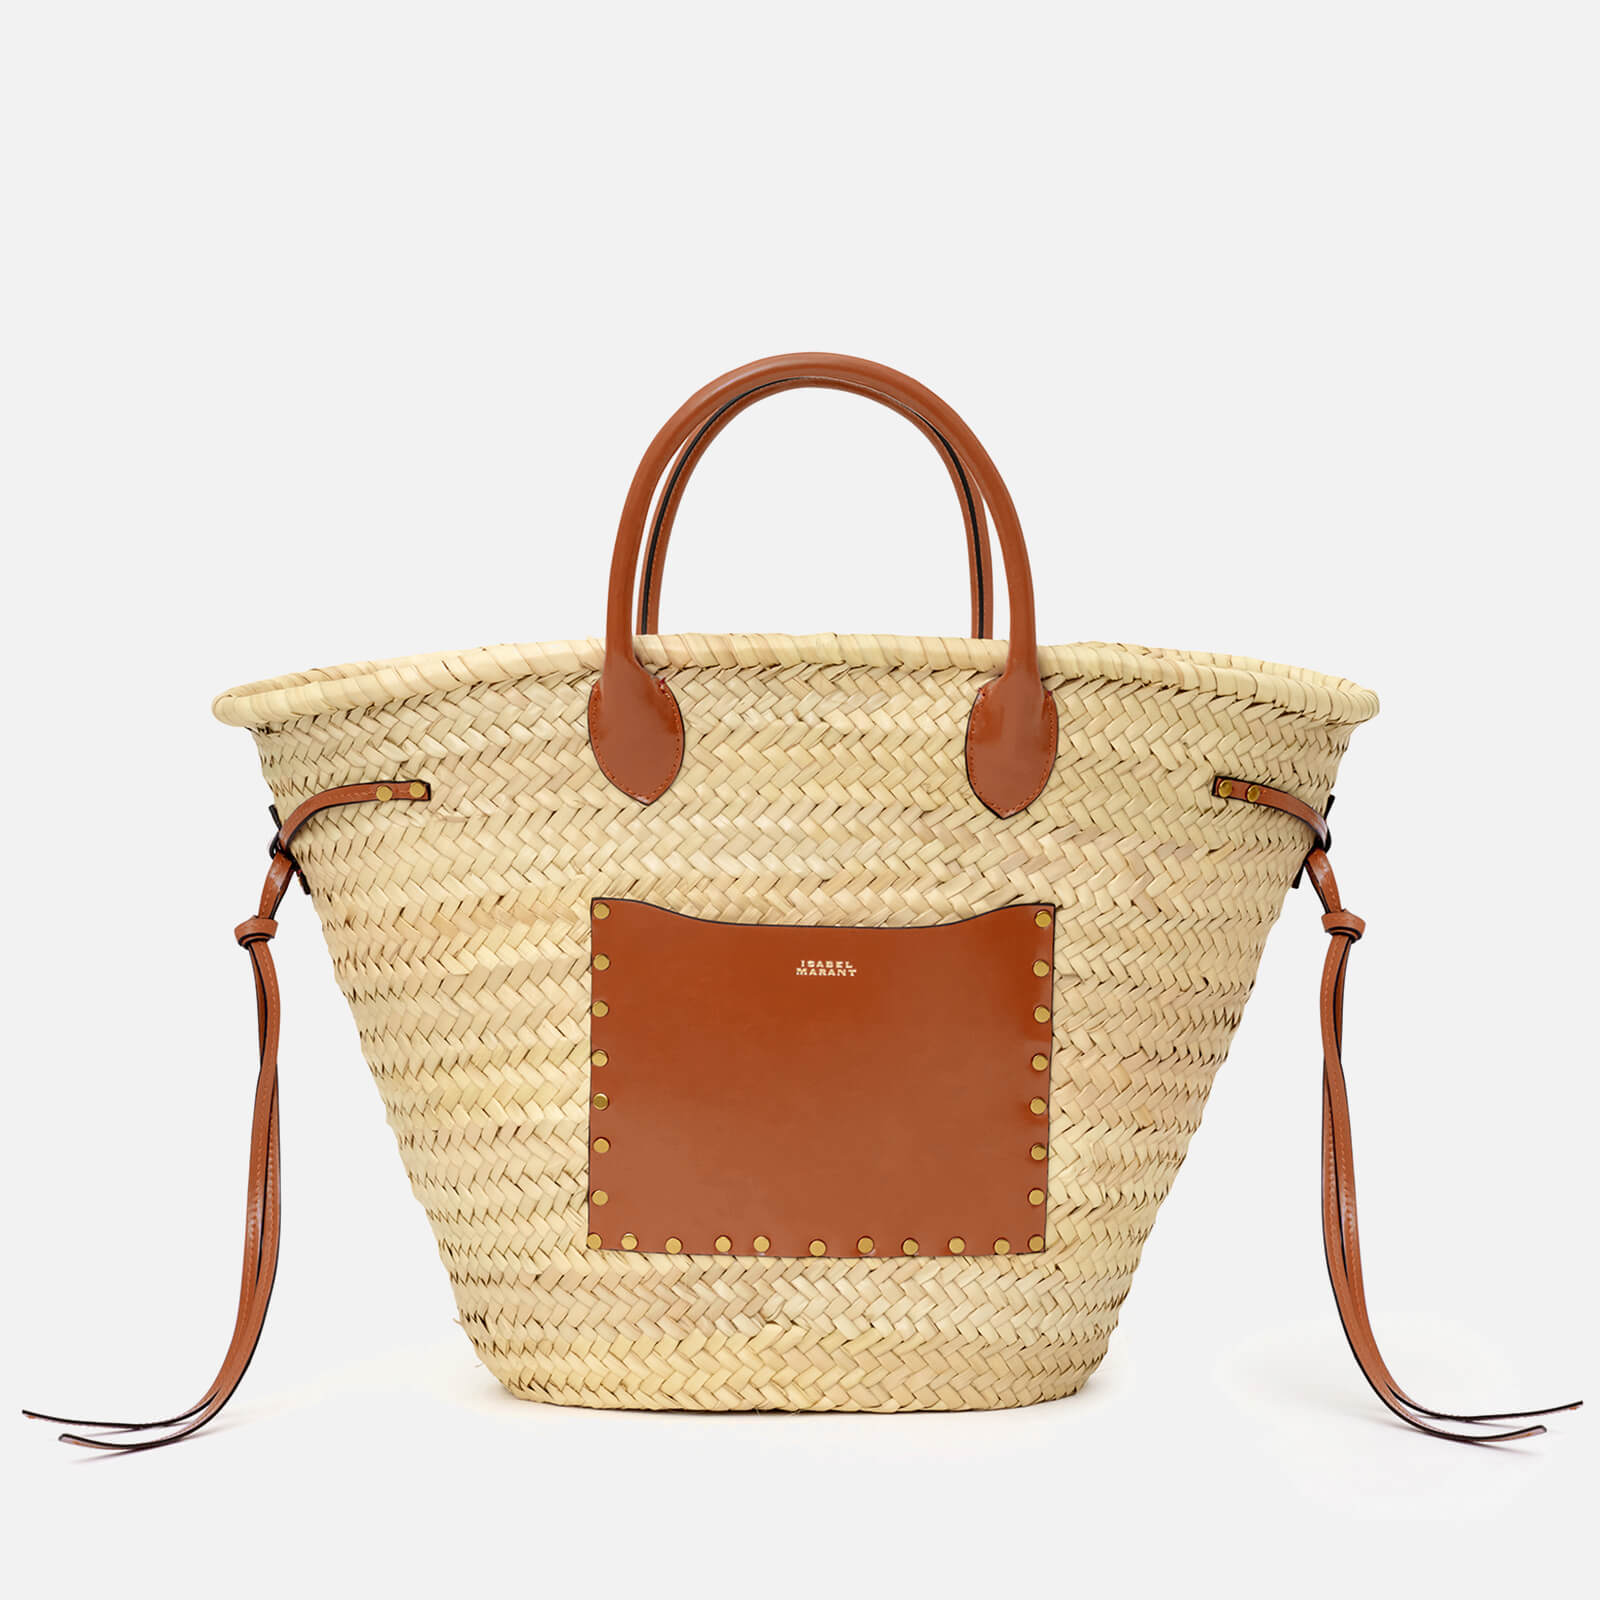 Isabel Marant Cadix Straw and Leather Tote Bag